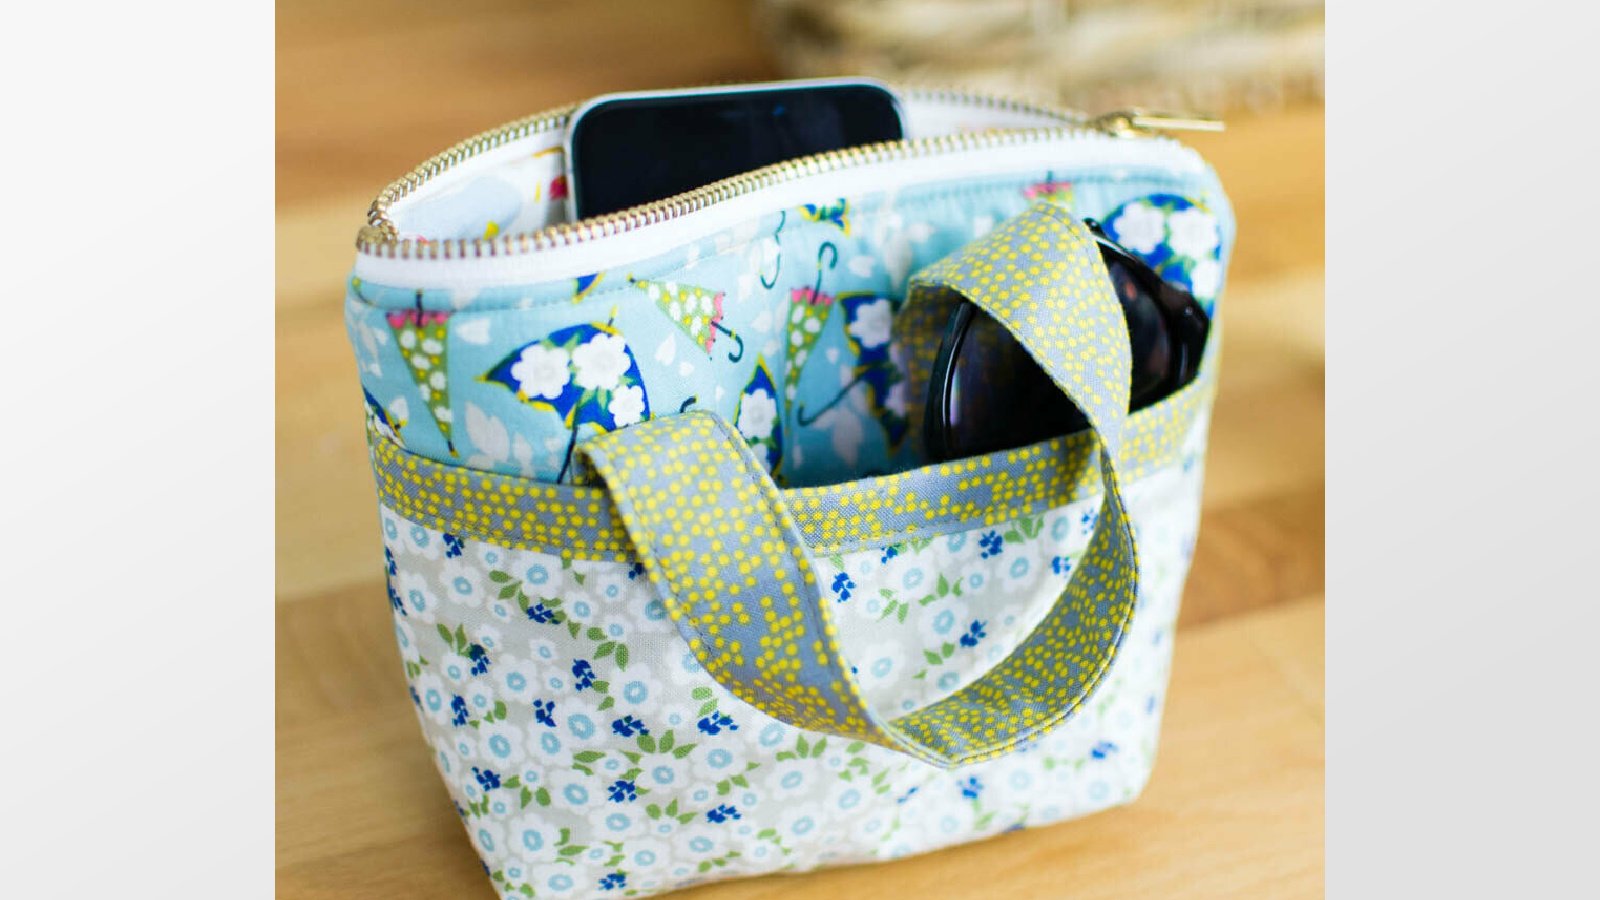 <p>What happens when you add handles and pockets to a zipper pouch? You get the <a href="https://sewcanshe.com/tiny-bag-pattern/" rel="noreferrer noopener">Tiny Zipper Bag</a>! All your favorite fabric scraps are screaming to be sewn into a super cute tiny bag! </p>